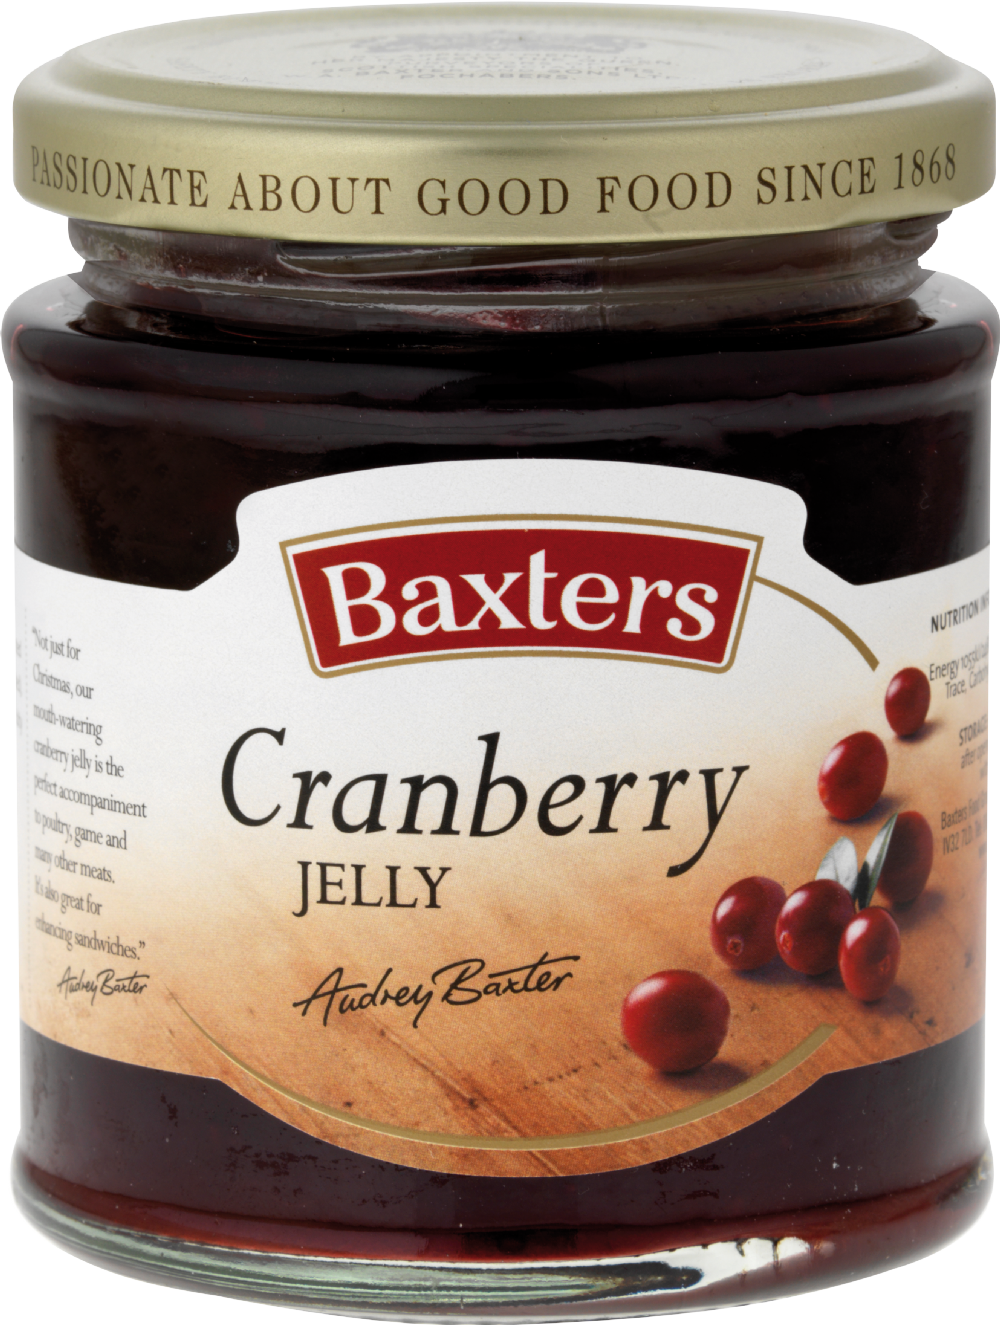 BAXTERS Cranberry Jelly 210g